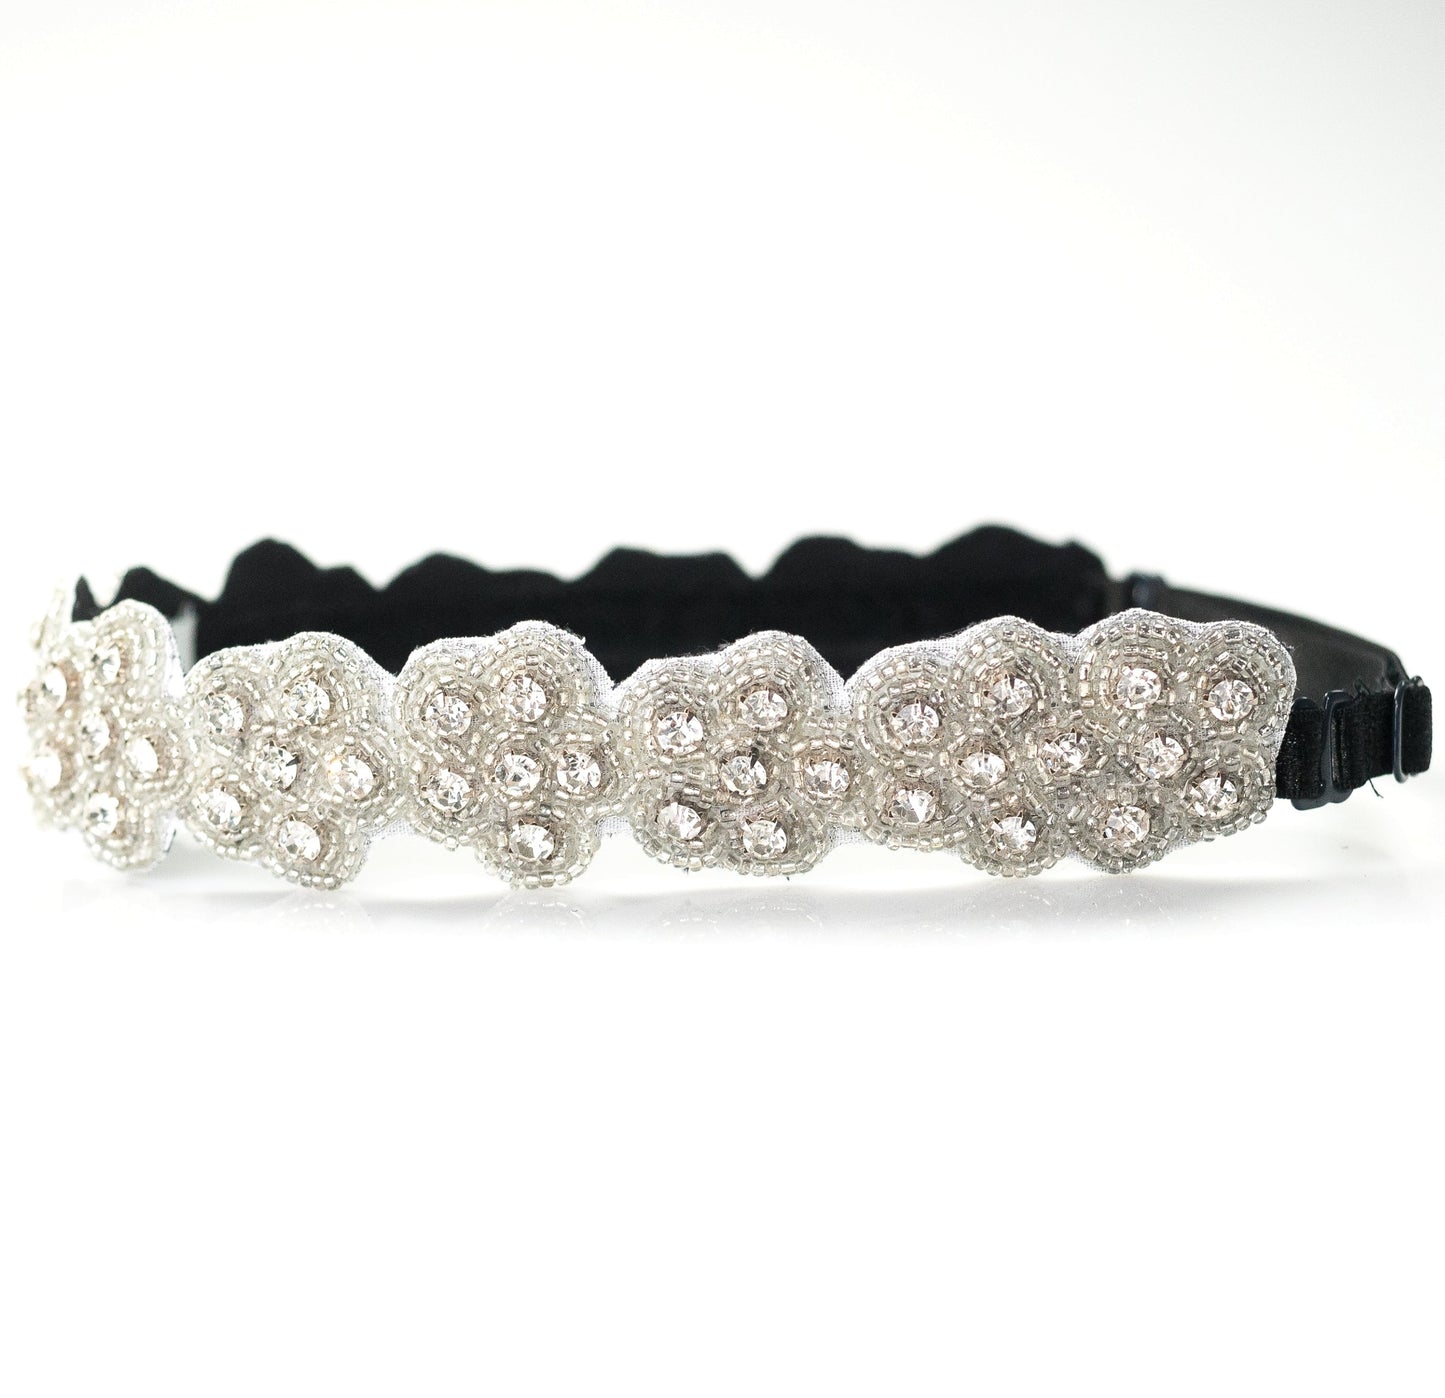 adjustable fashion headband with crystals and clear beads